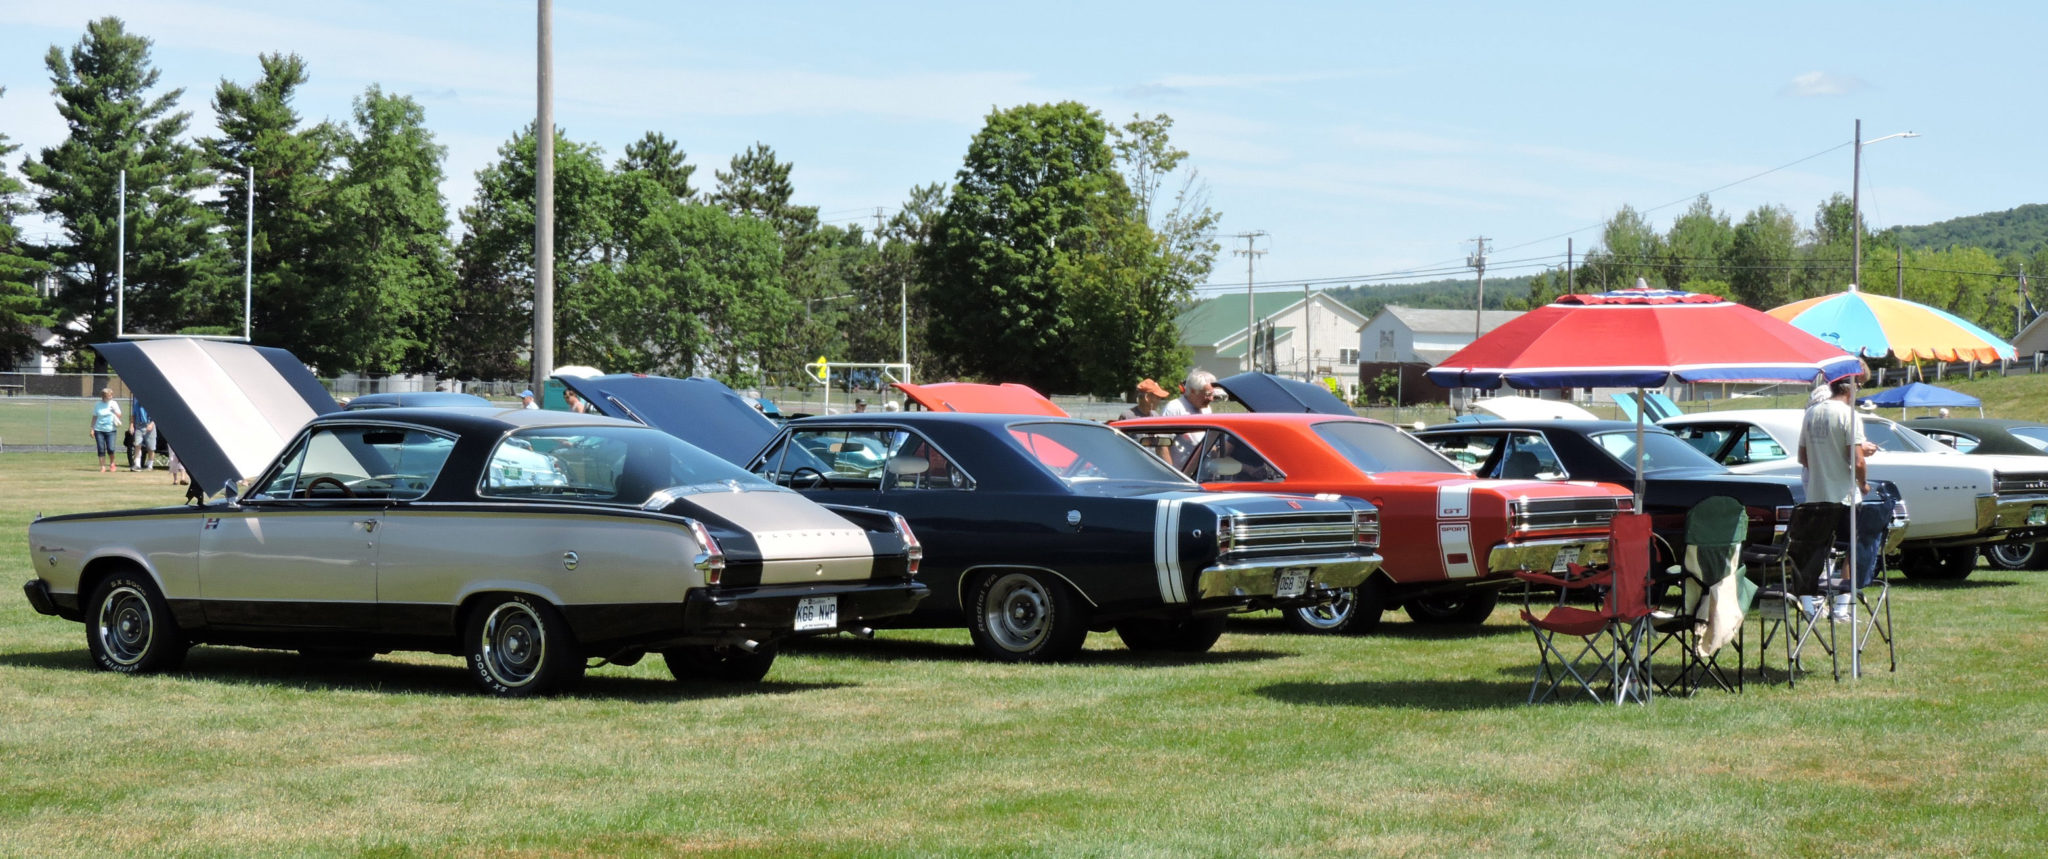 VT Newport Annual Car Show and Barbeque